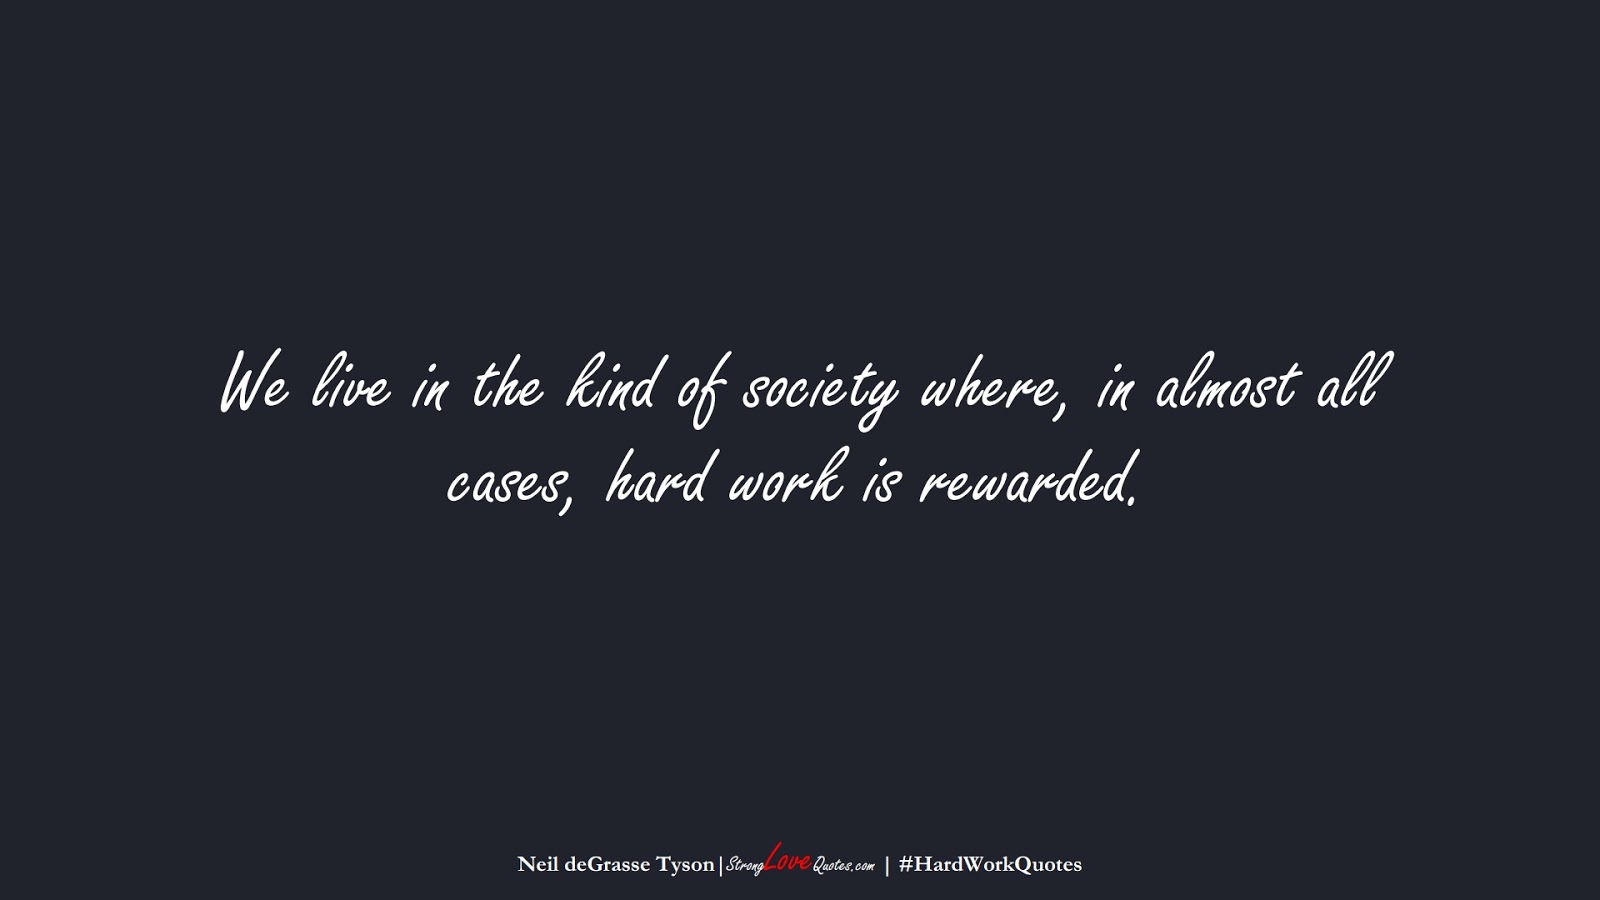 We live in the kind of society where, in almost all cases, hard work is rewarded. (Neil deGrasse Tyson);  #HardWorkQuotes